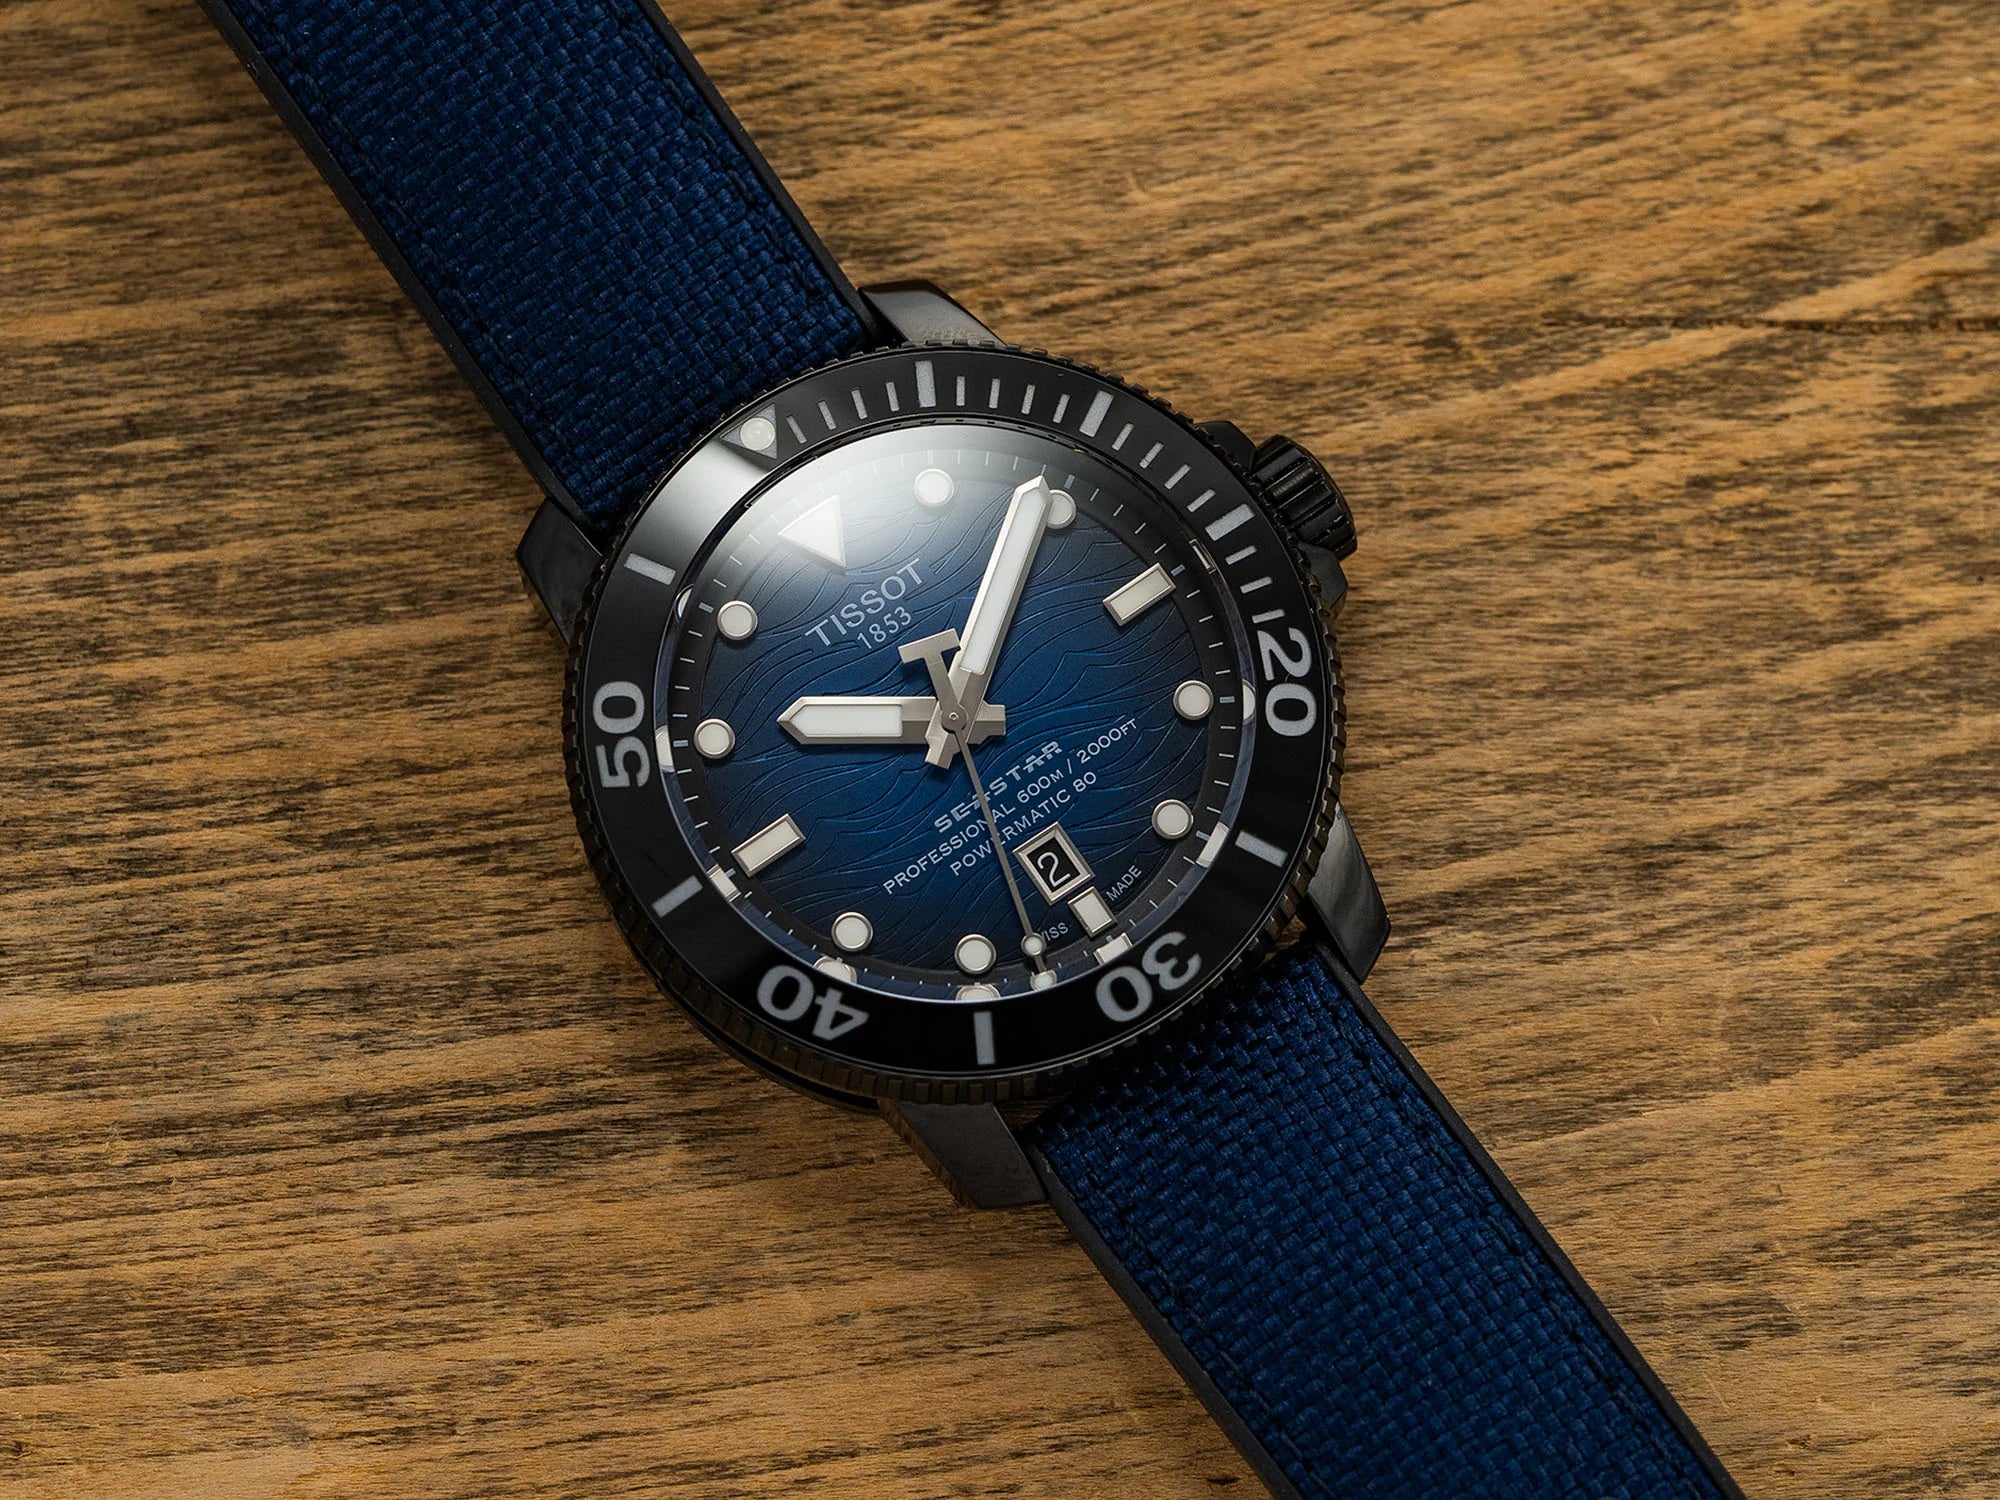 Why do rubber watch straps and luxury watches go together so well